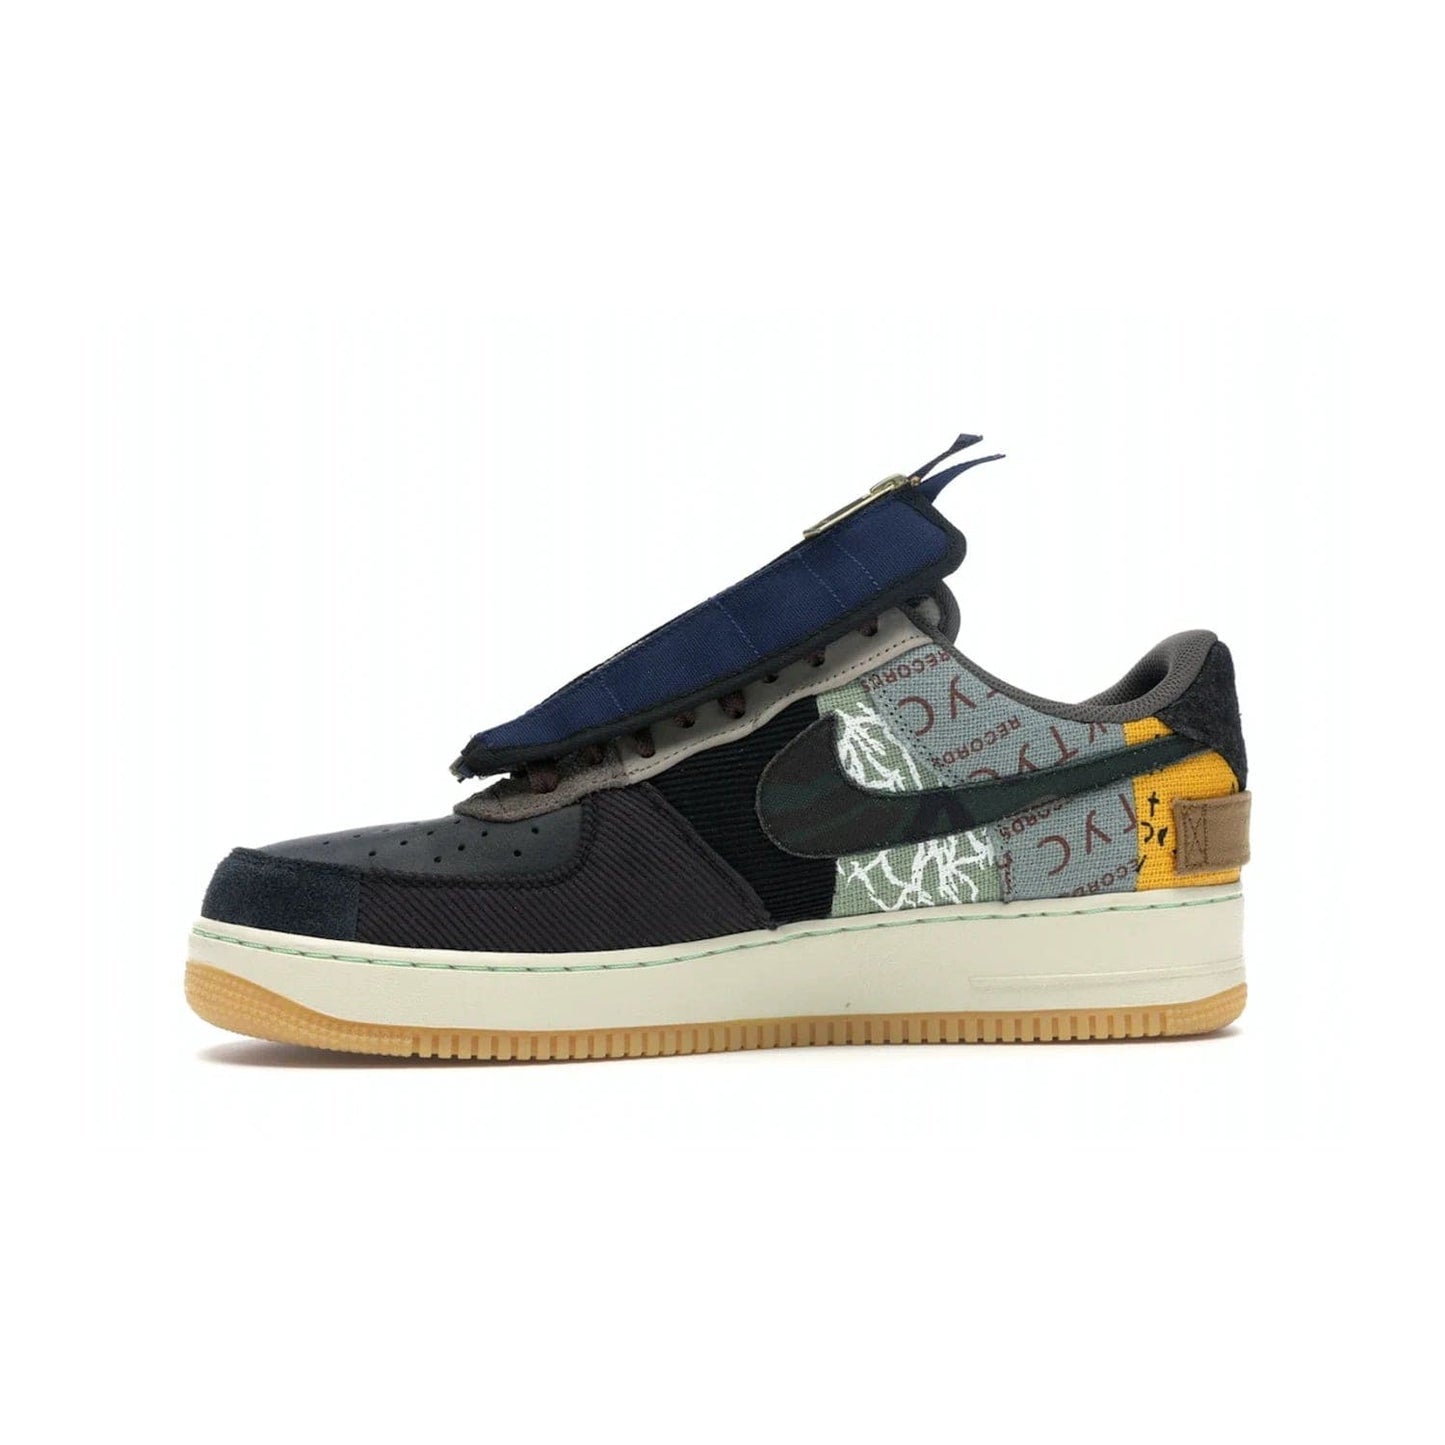 Nike Air Force 1 Low Travis Scott Cactus Jack - Image 18 - Only at www.BallersClubKickz.com - The Nike Air Force 1 Low Travis Scott Cactus Jack features a unique, multi-colored patchwork upper with muted bronze and fossil accents. Includes detachable lace cover, brass zipper, and Cactus Jack insignias. A sail midsole, gum rubber outsole complete the eye-catching design. Perfect for comfort and style with unexpected touches of detail.